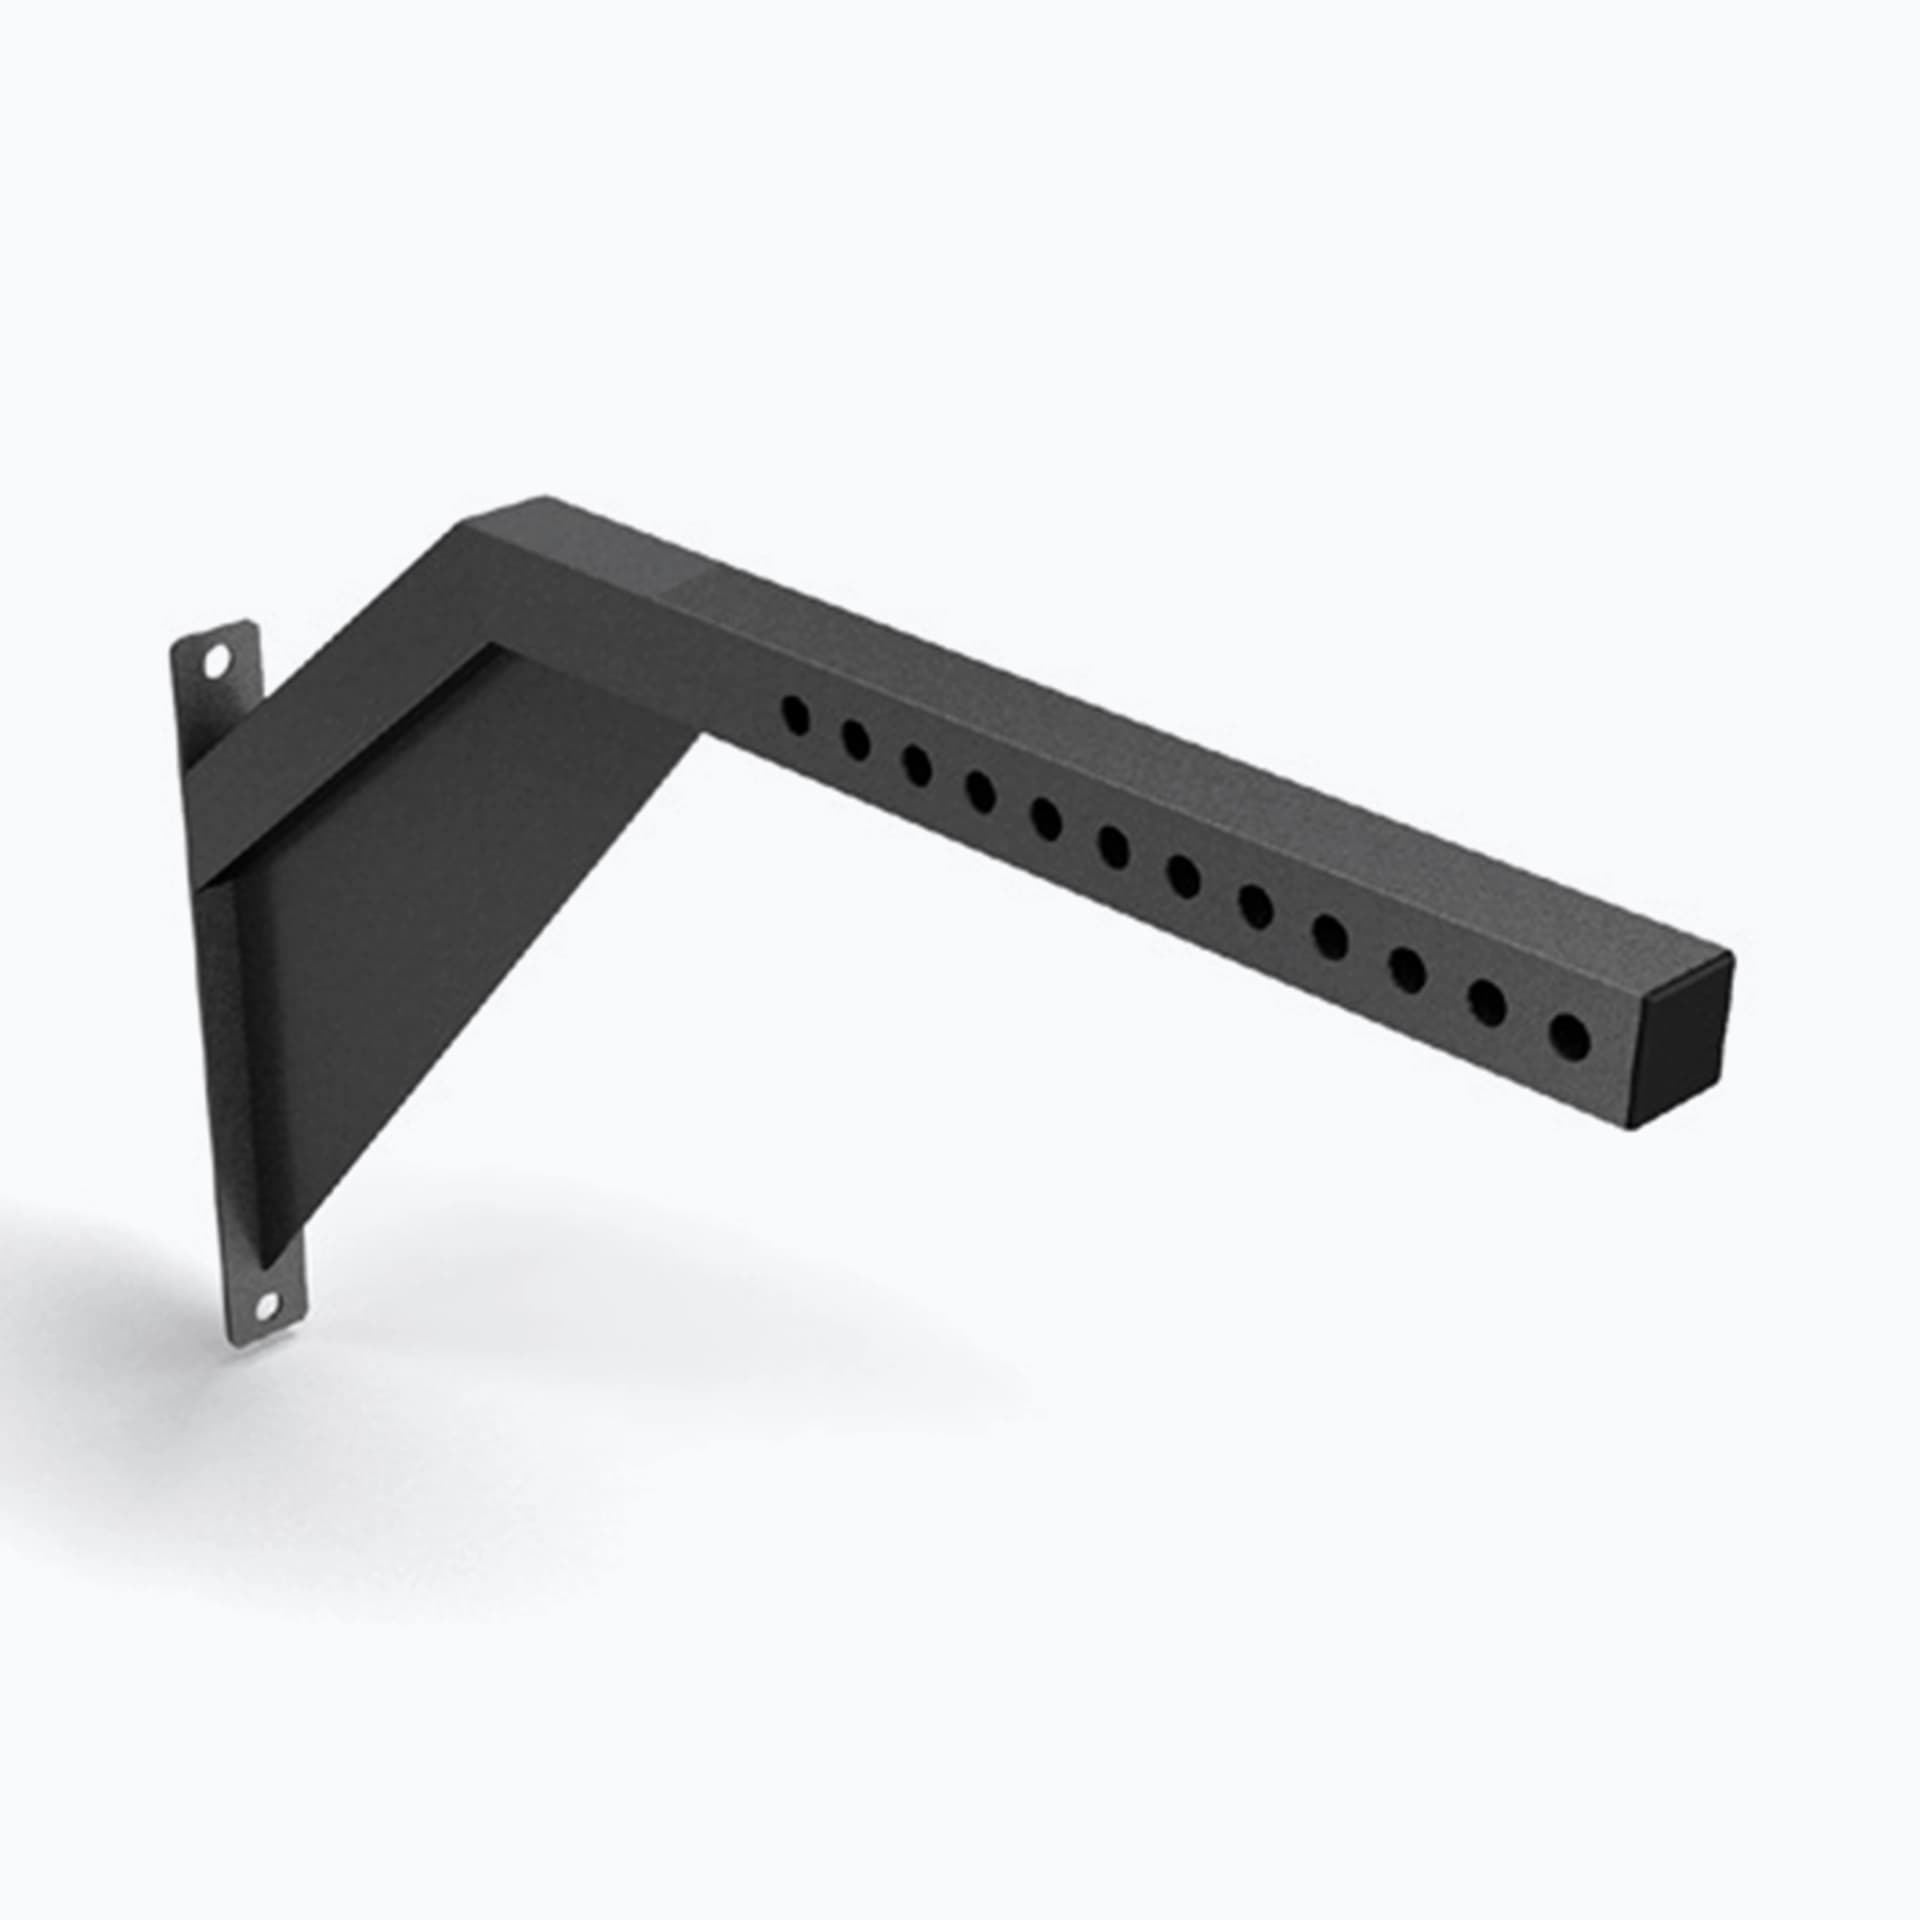 XP ANGLED ARM CANTILEVER ACCESSORY EXTENSION ATTACHMENT